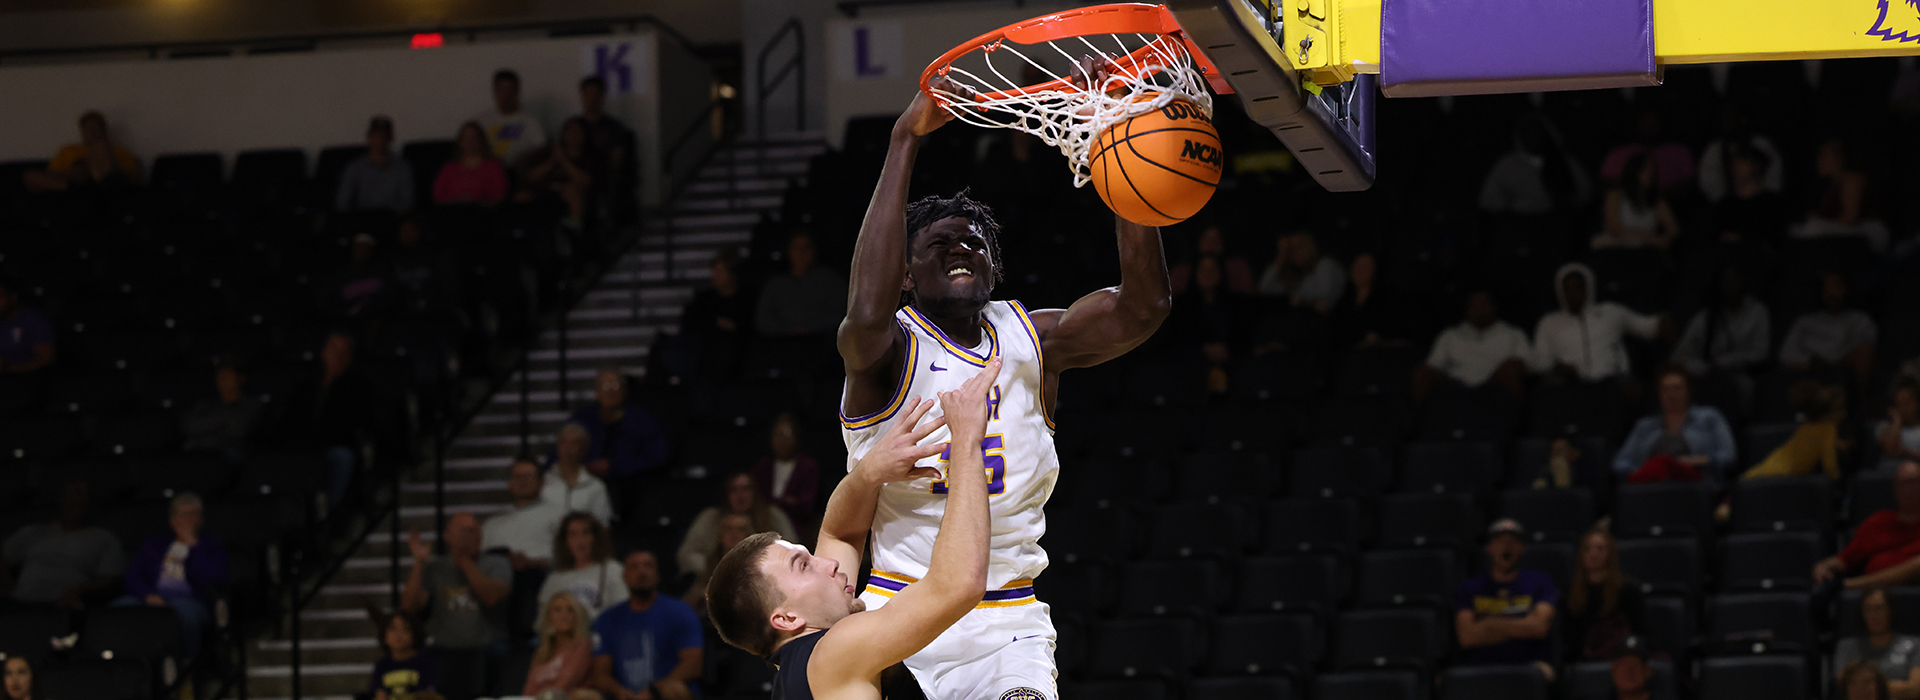 Second-half surge lifts Tech to big win over Tennessee Wesleyan in home opener